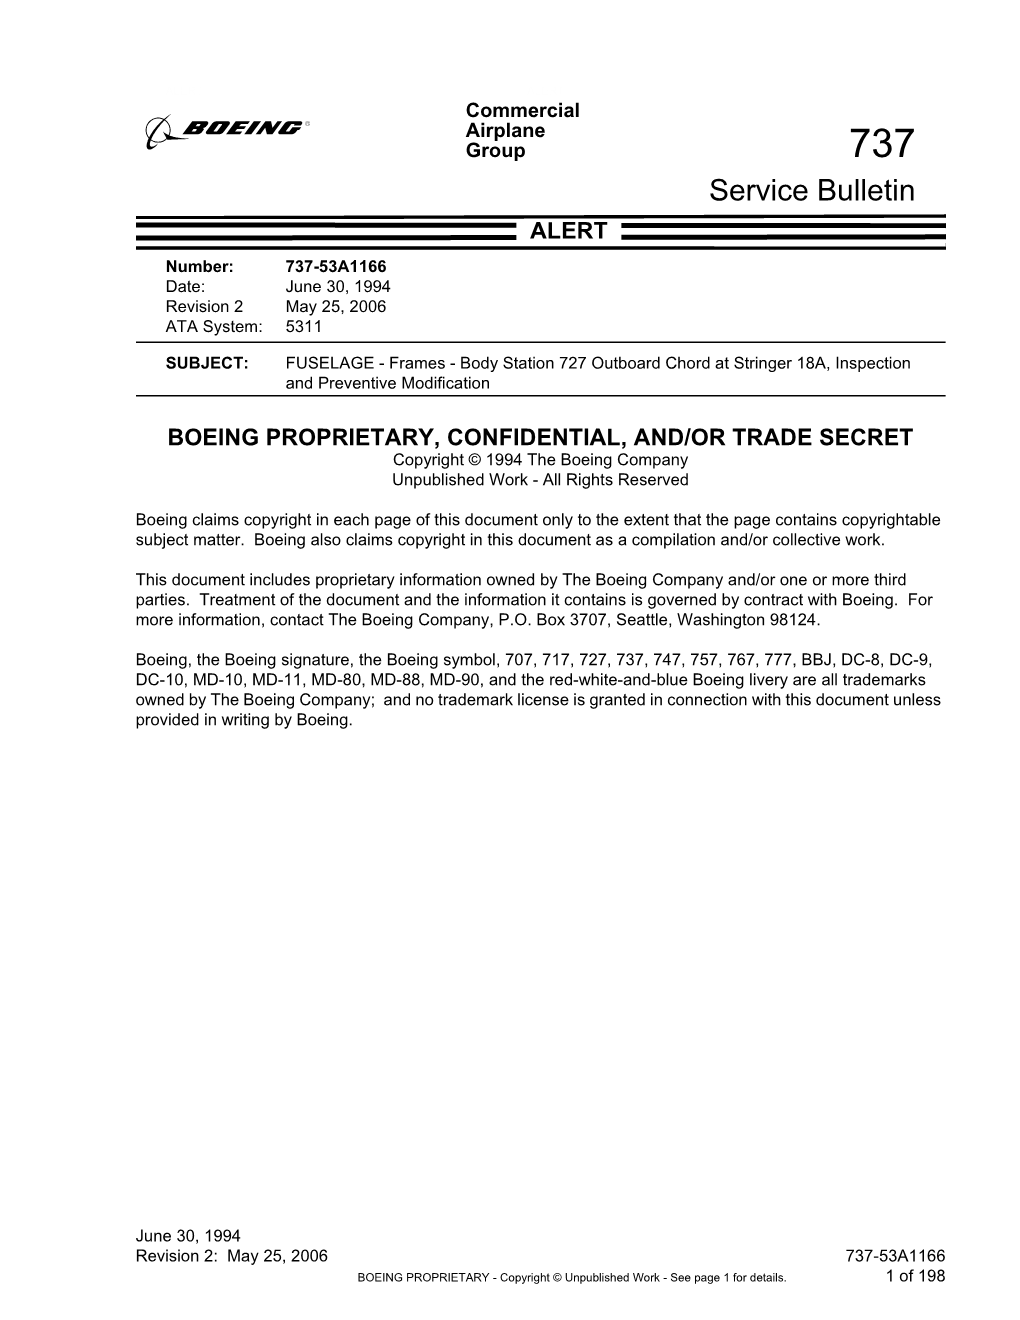 737 Service Bulletin ALERTALERT Number: 737-53A1166 Date: June 30, 1994 Revision 2 May 25, 2006 ATA System: 5311